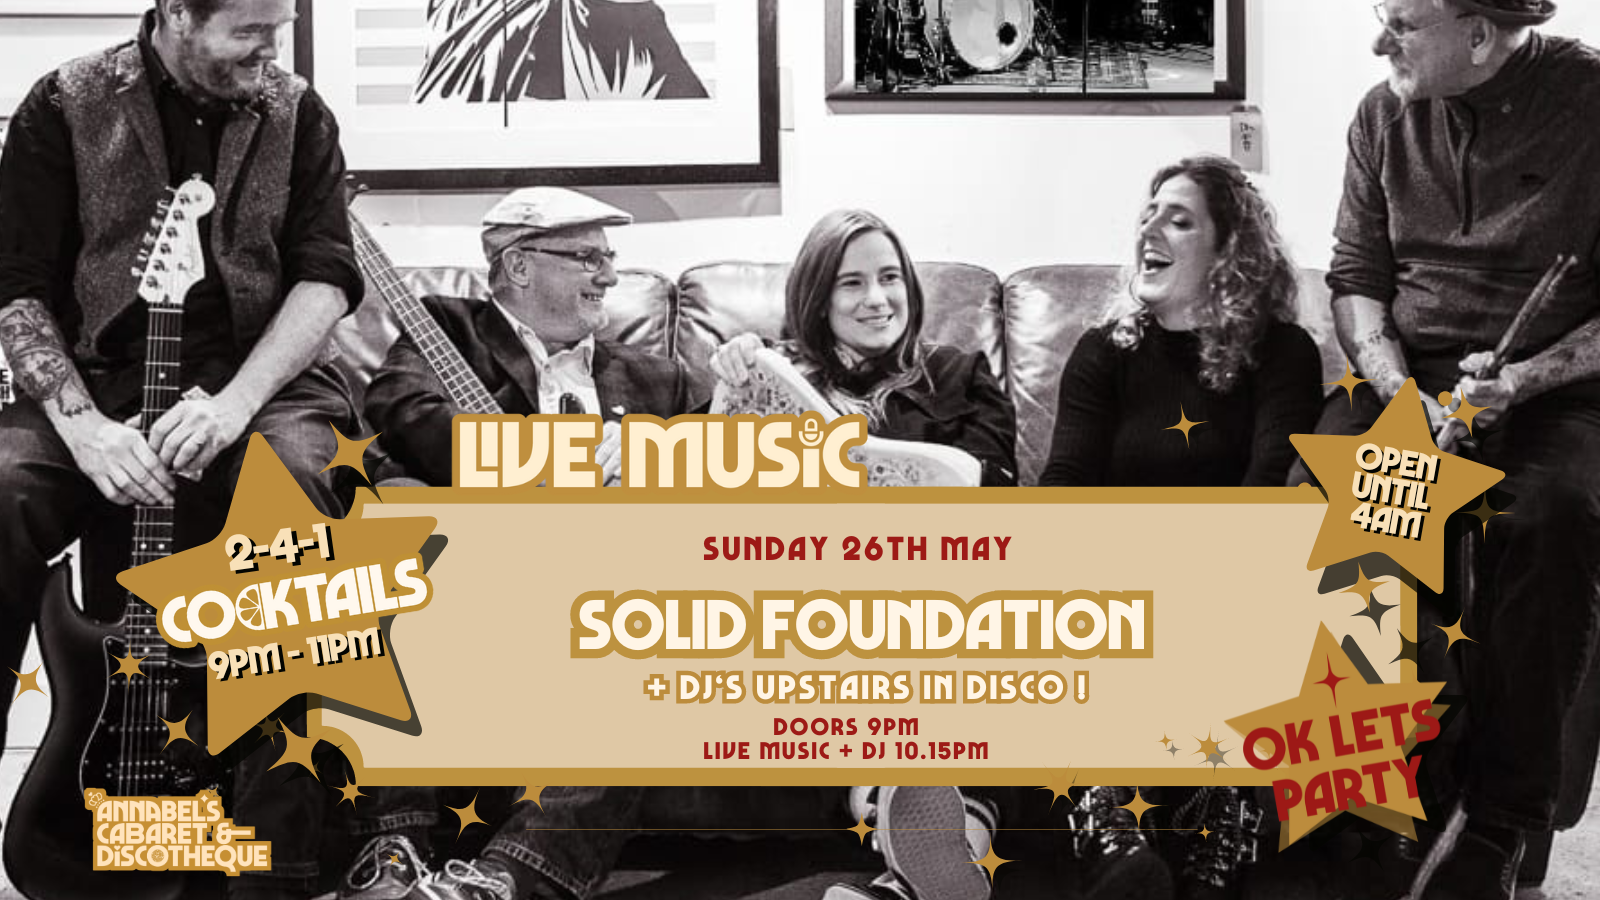 Live Music: SOLID FOUNDATION // Annabel’s Cabaret & Discotheque  Event Time